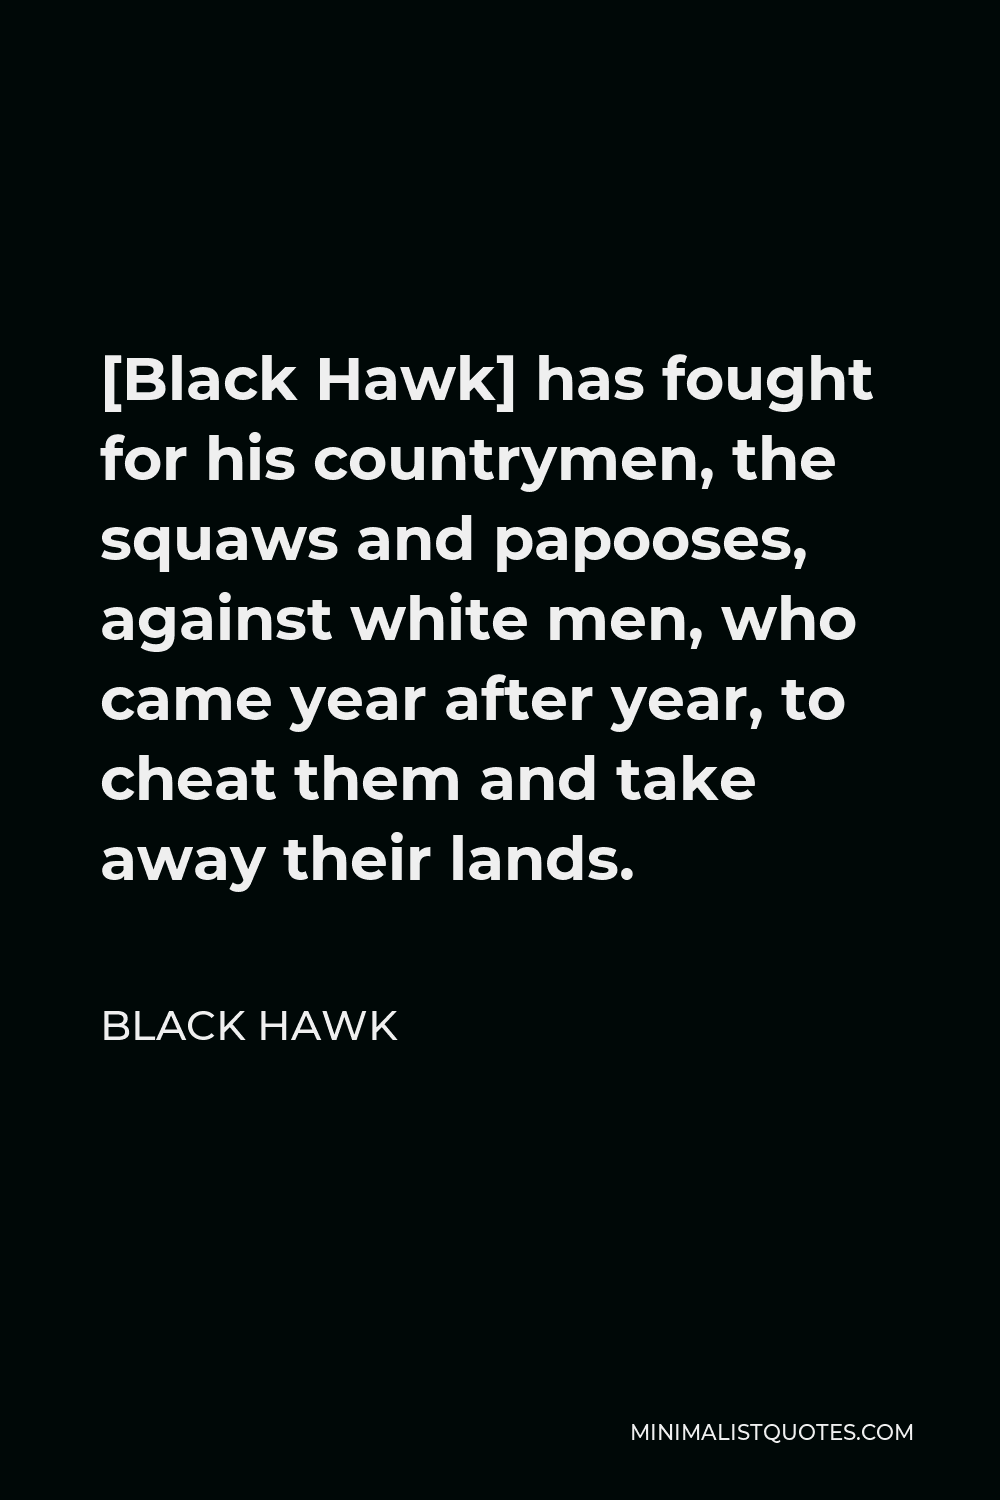 Black Hawk Quote - [Black Hawk] has fought for his countrymen, the squaws and papooses, against white men, who came year after year, to cheat them and take away their lands.